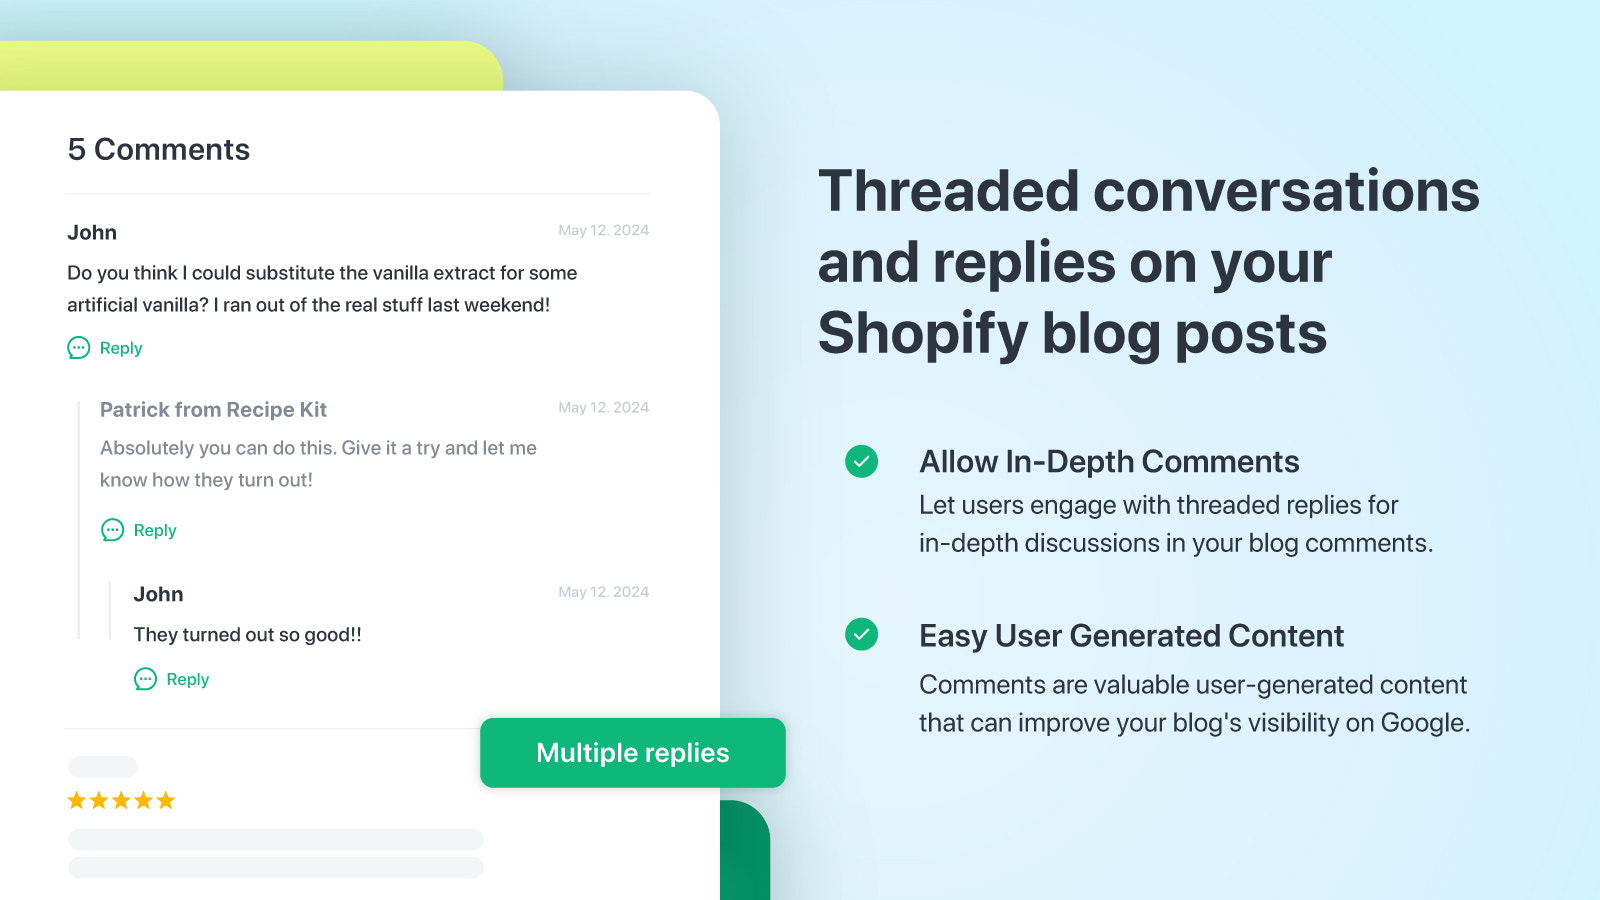 Threaded conversations and replies on your blog posts.